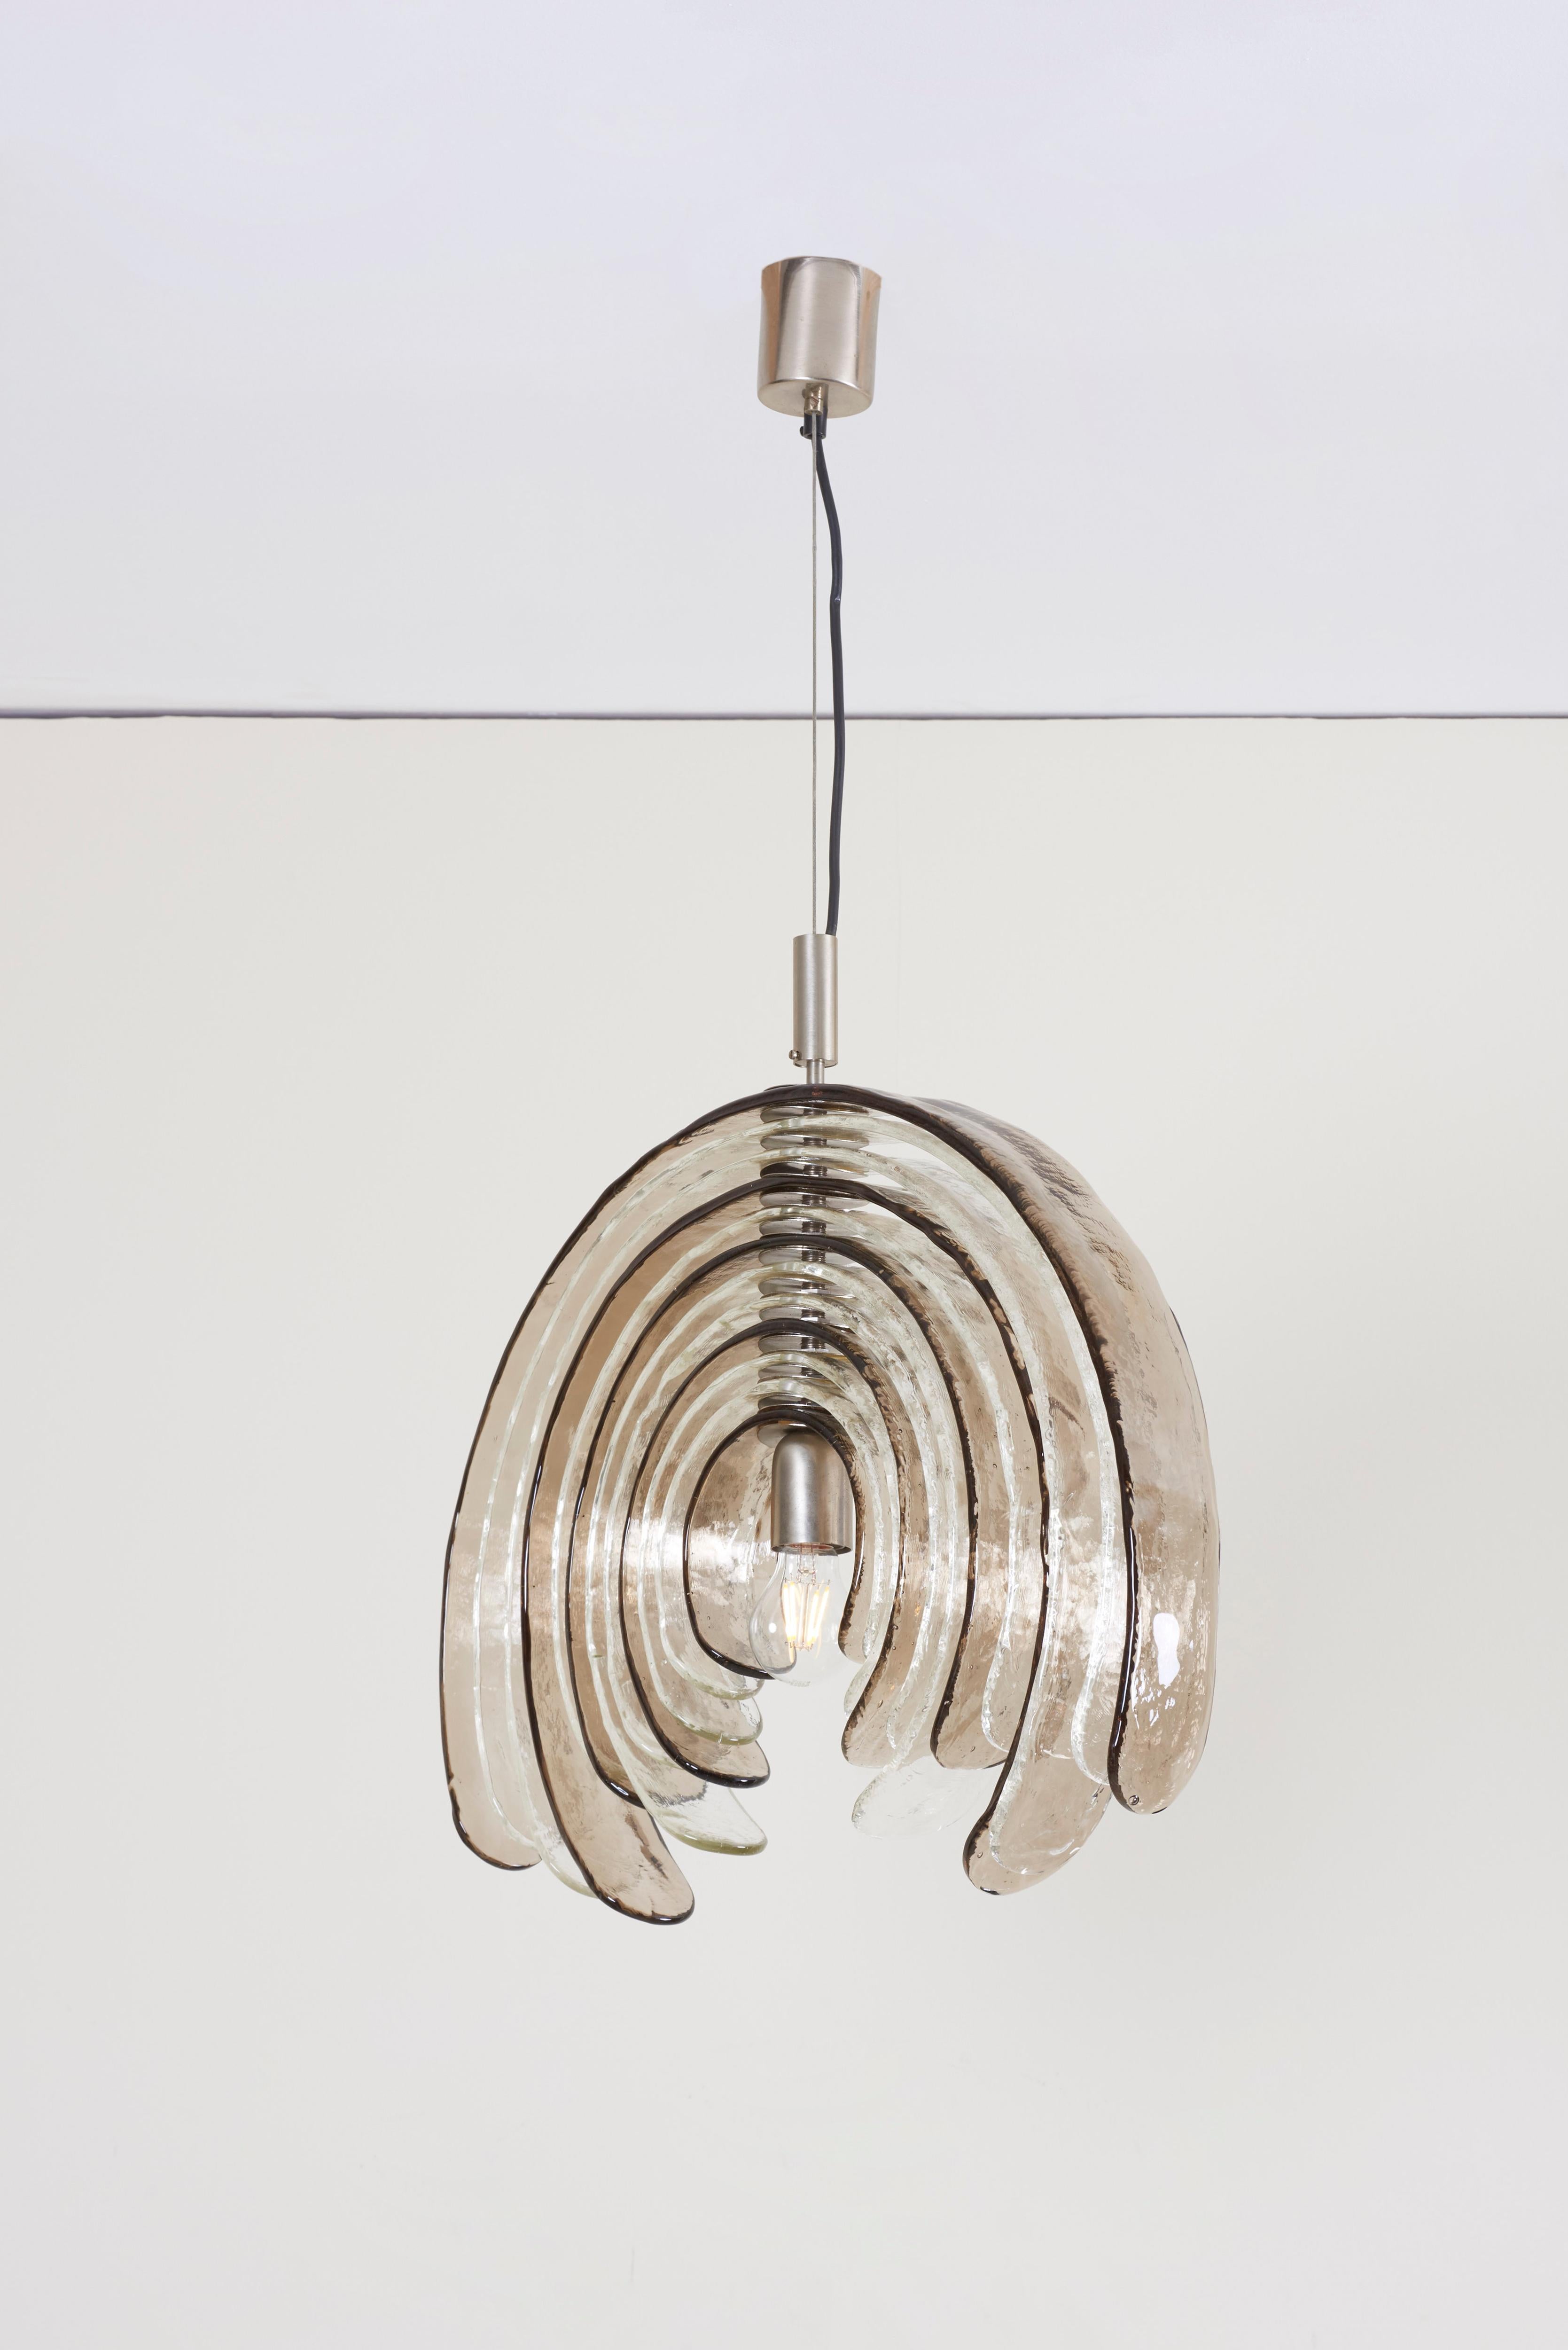 High-end sculptural artichoke chandelier by Carlo Nason for Mazzega. Thick clear and bronze textured glass blades. The blades can be put in the position of one line as unfolding into a flower. Illuminates beautifully. Perfect for a soft, warm and